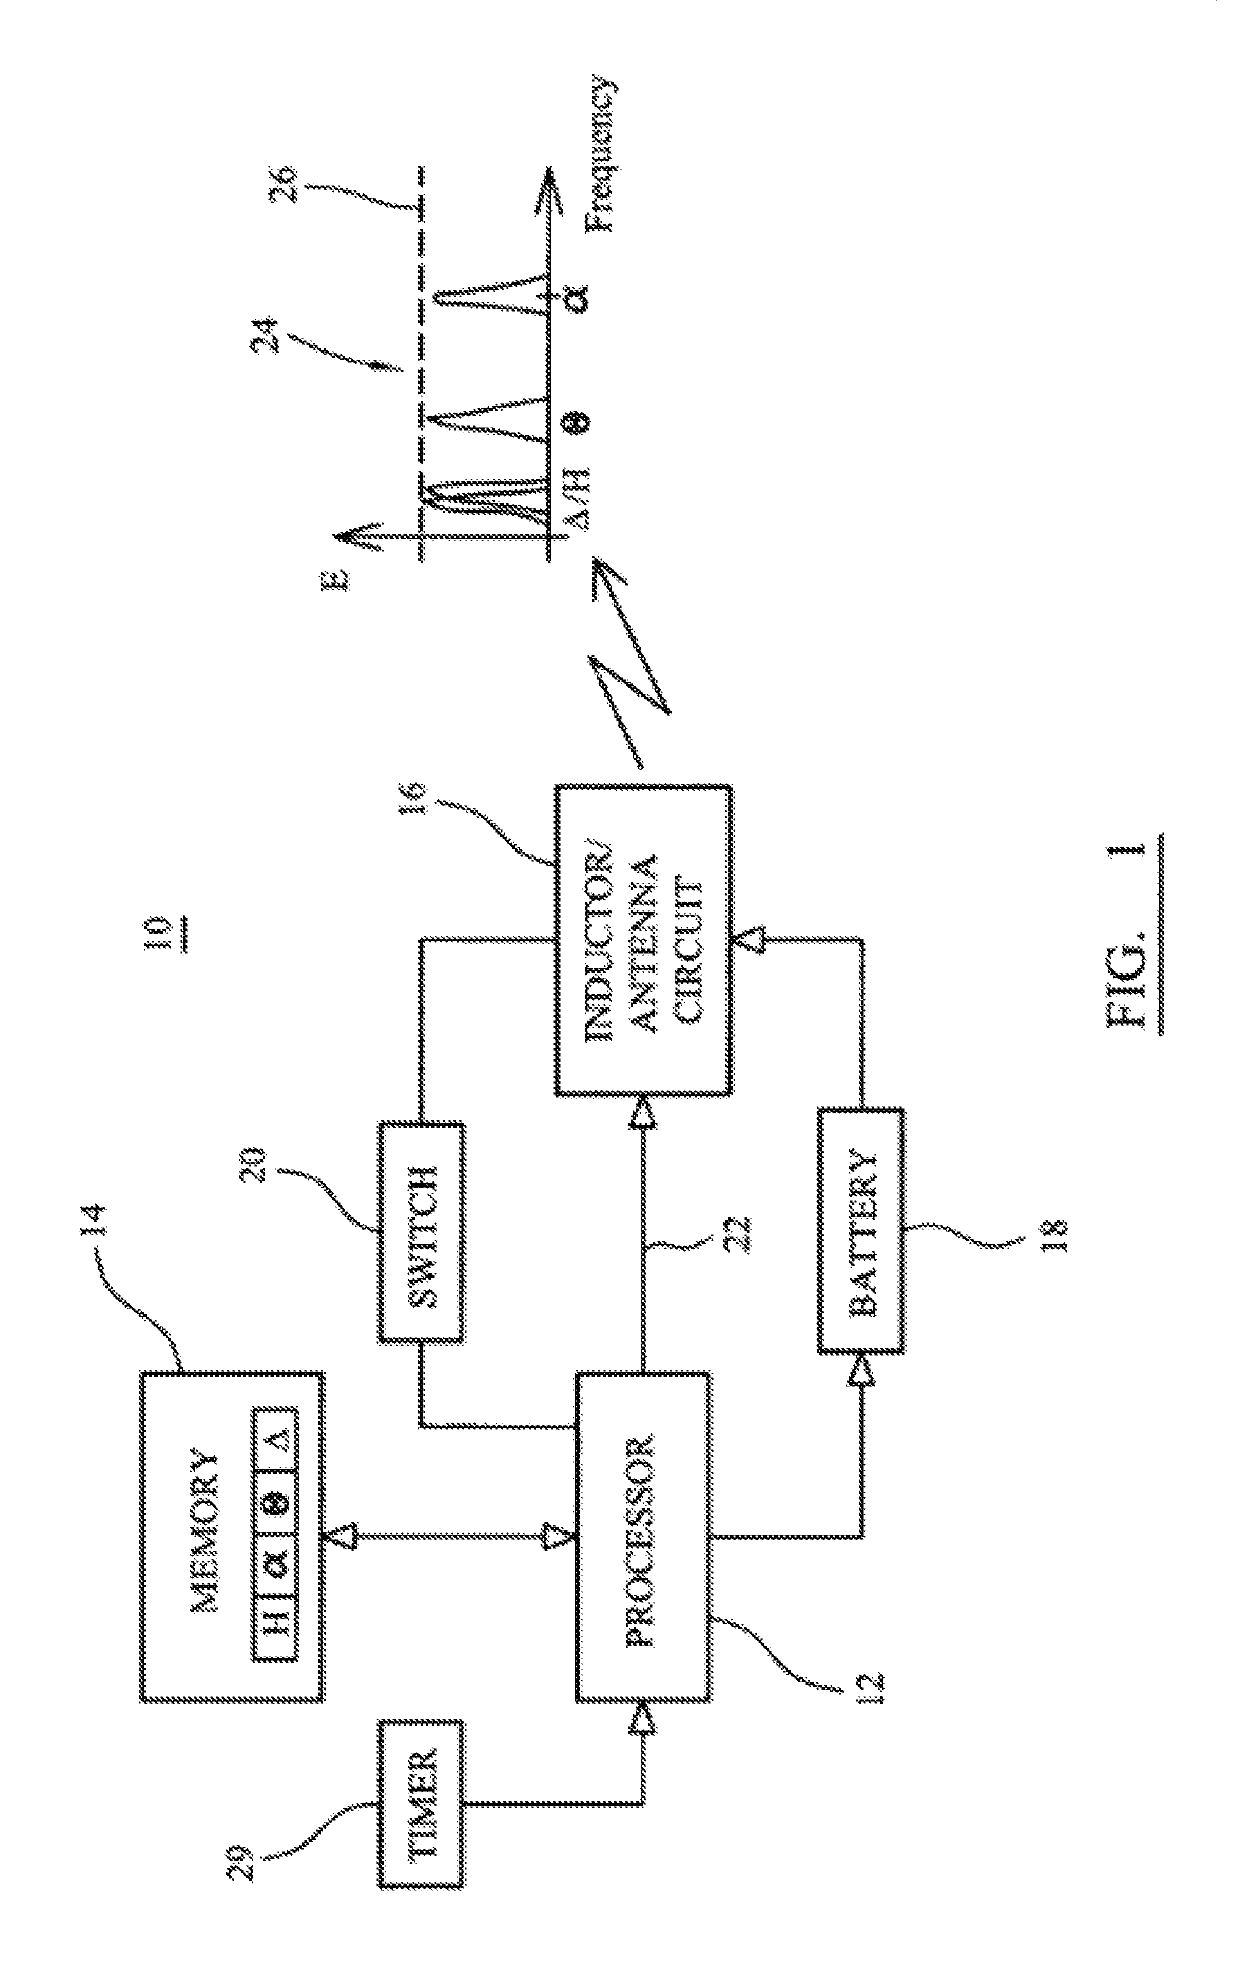 Therapeutic field generator device and method